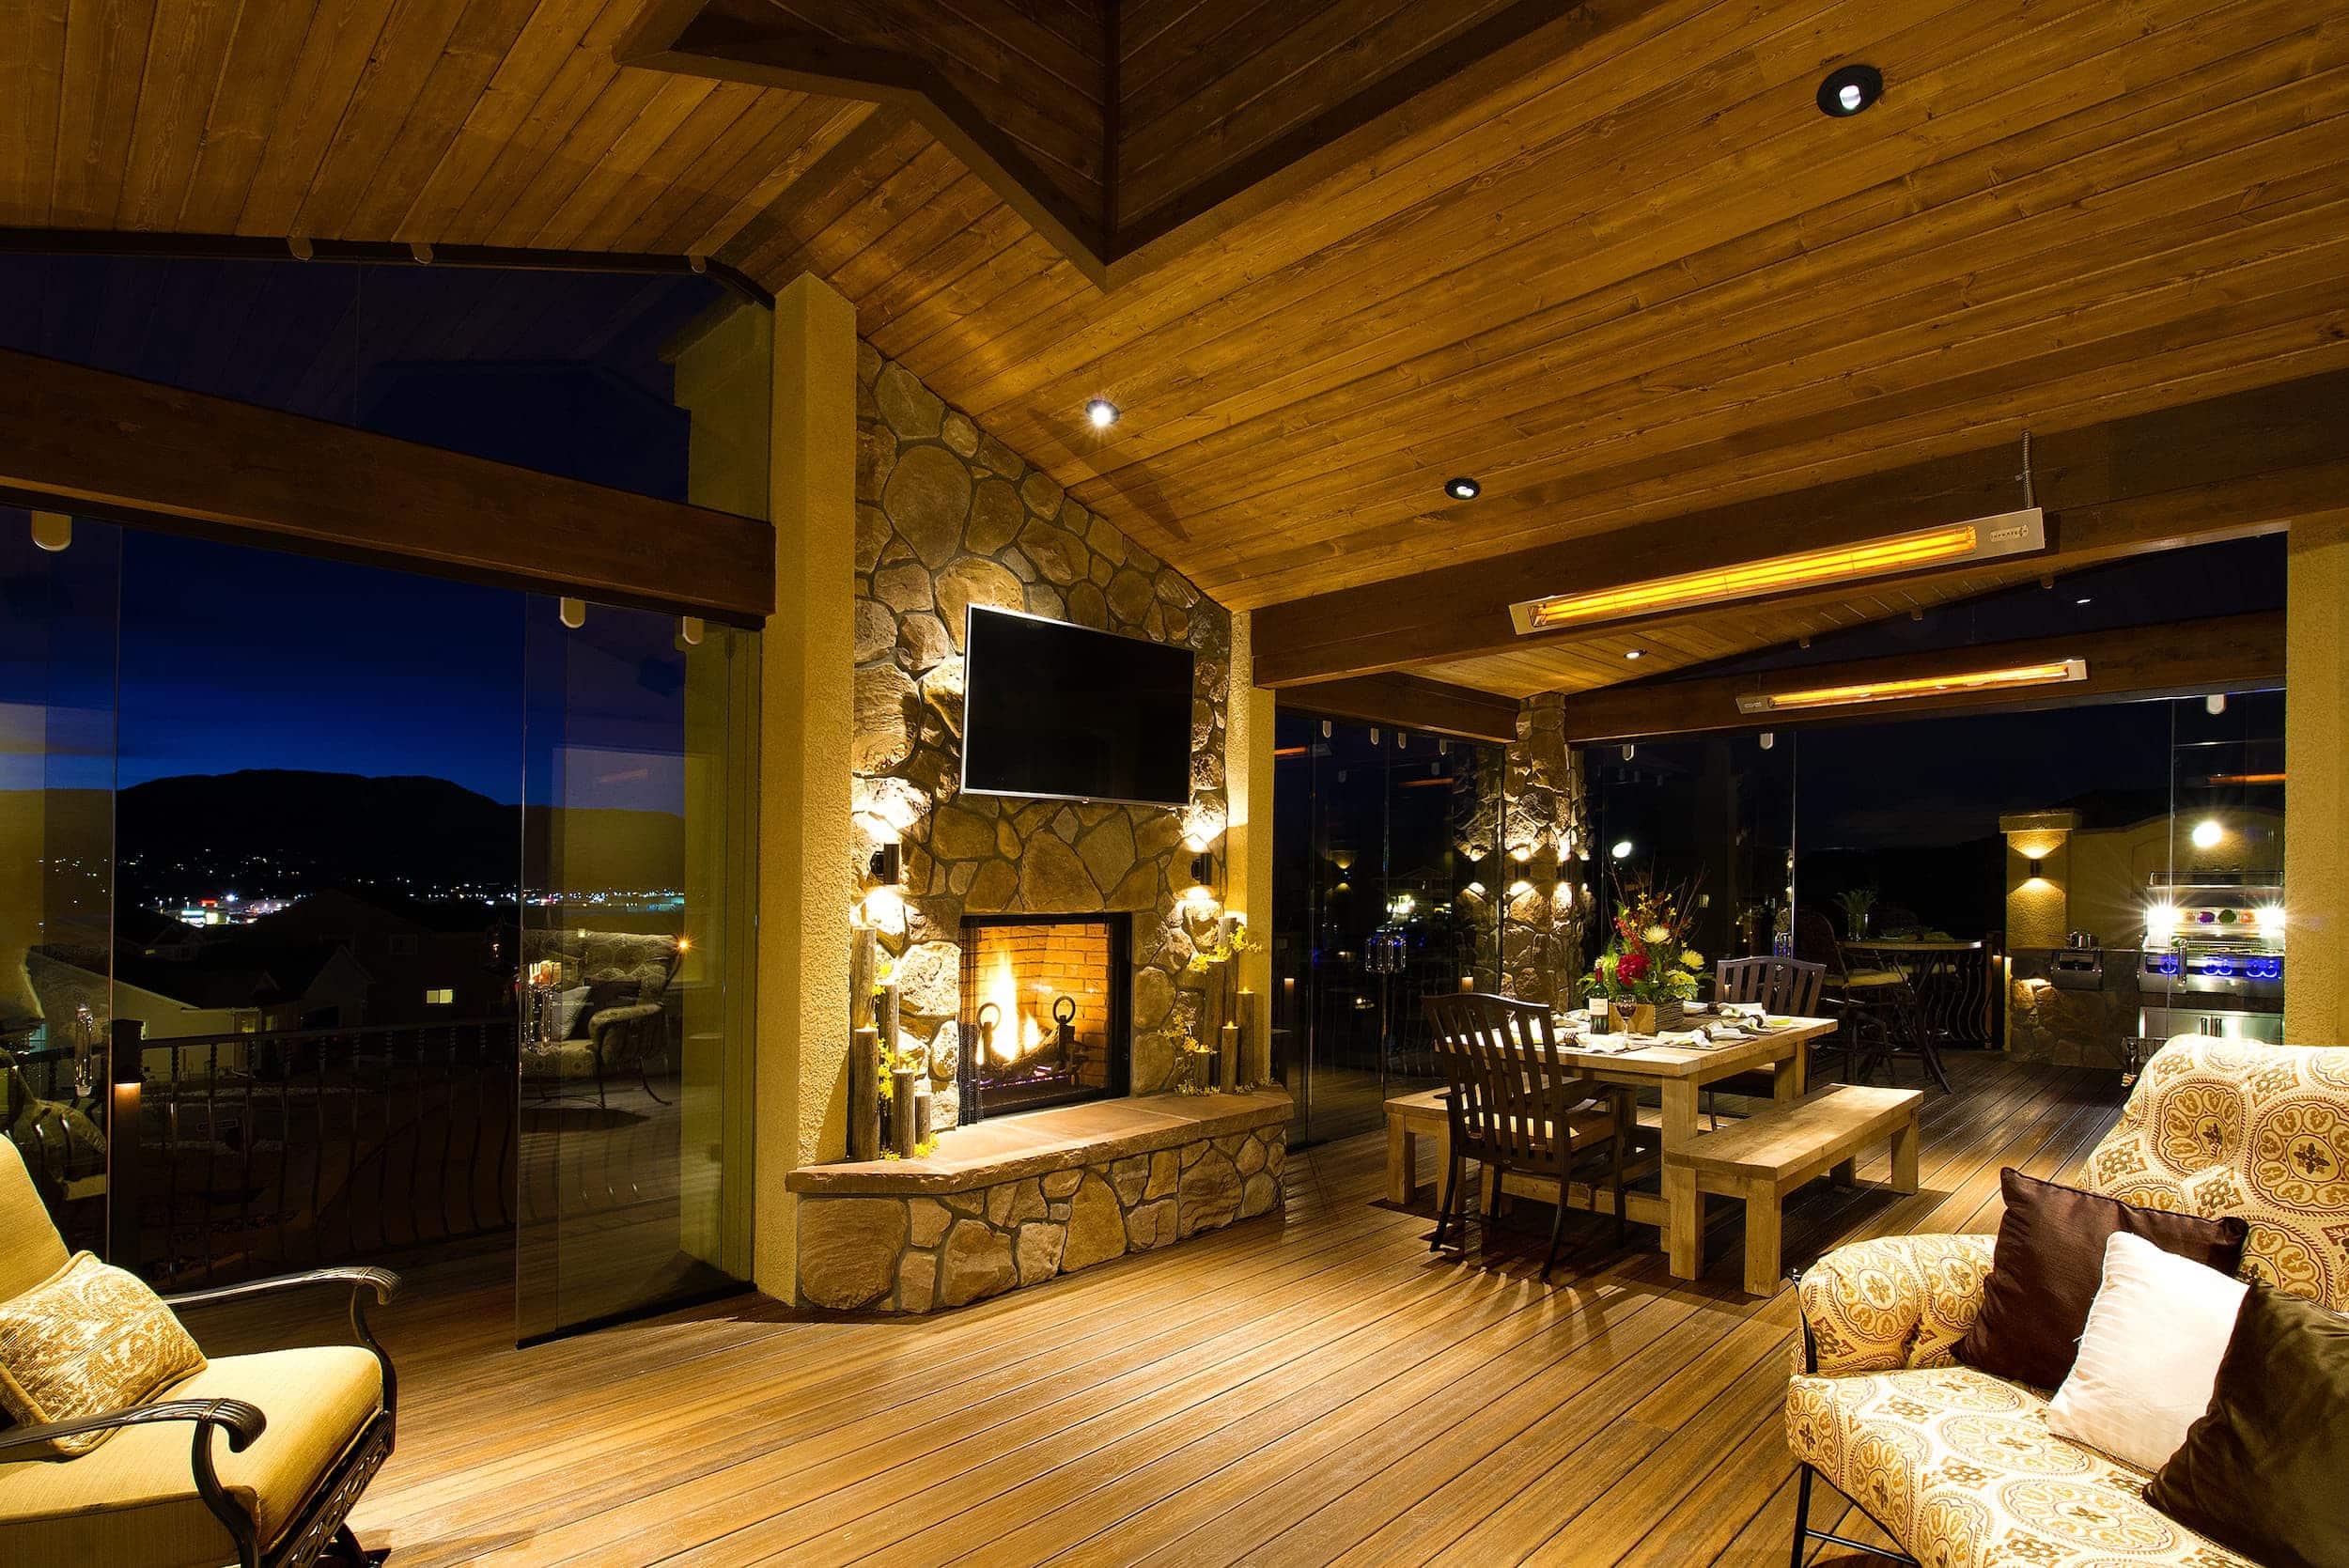 A wooden deck with a fireplace.